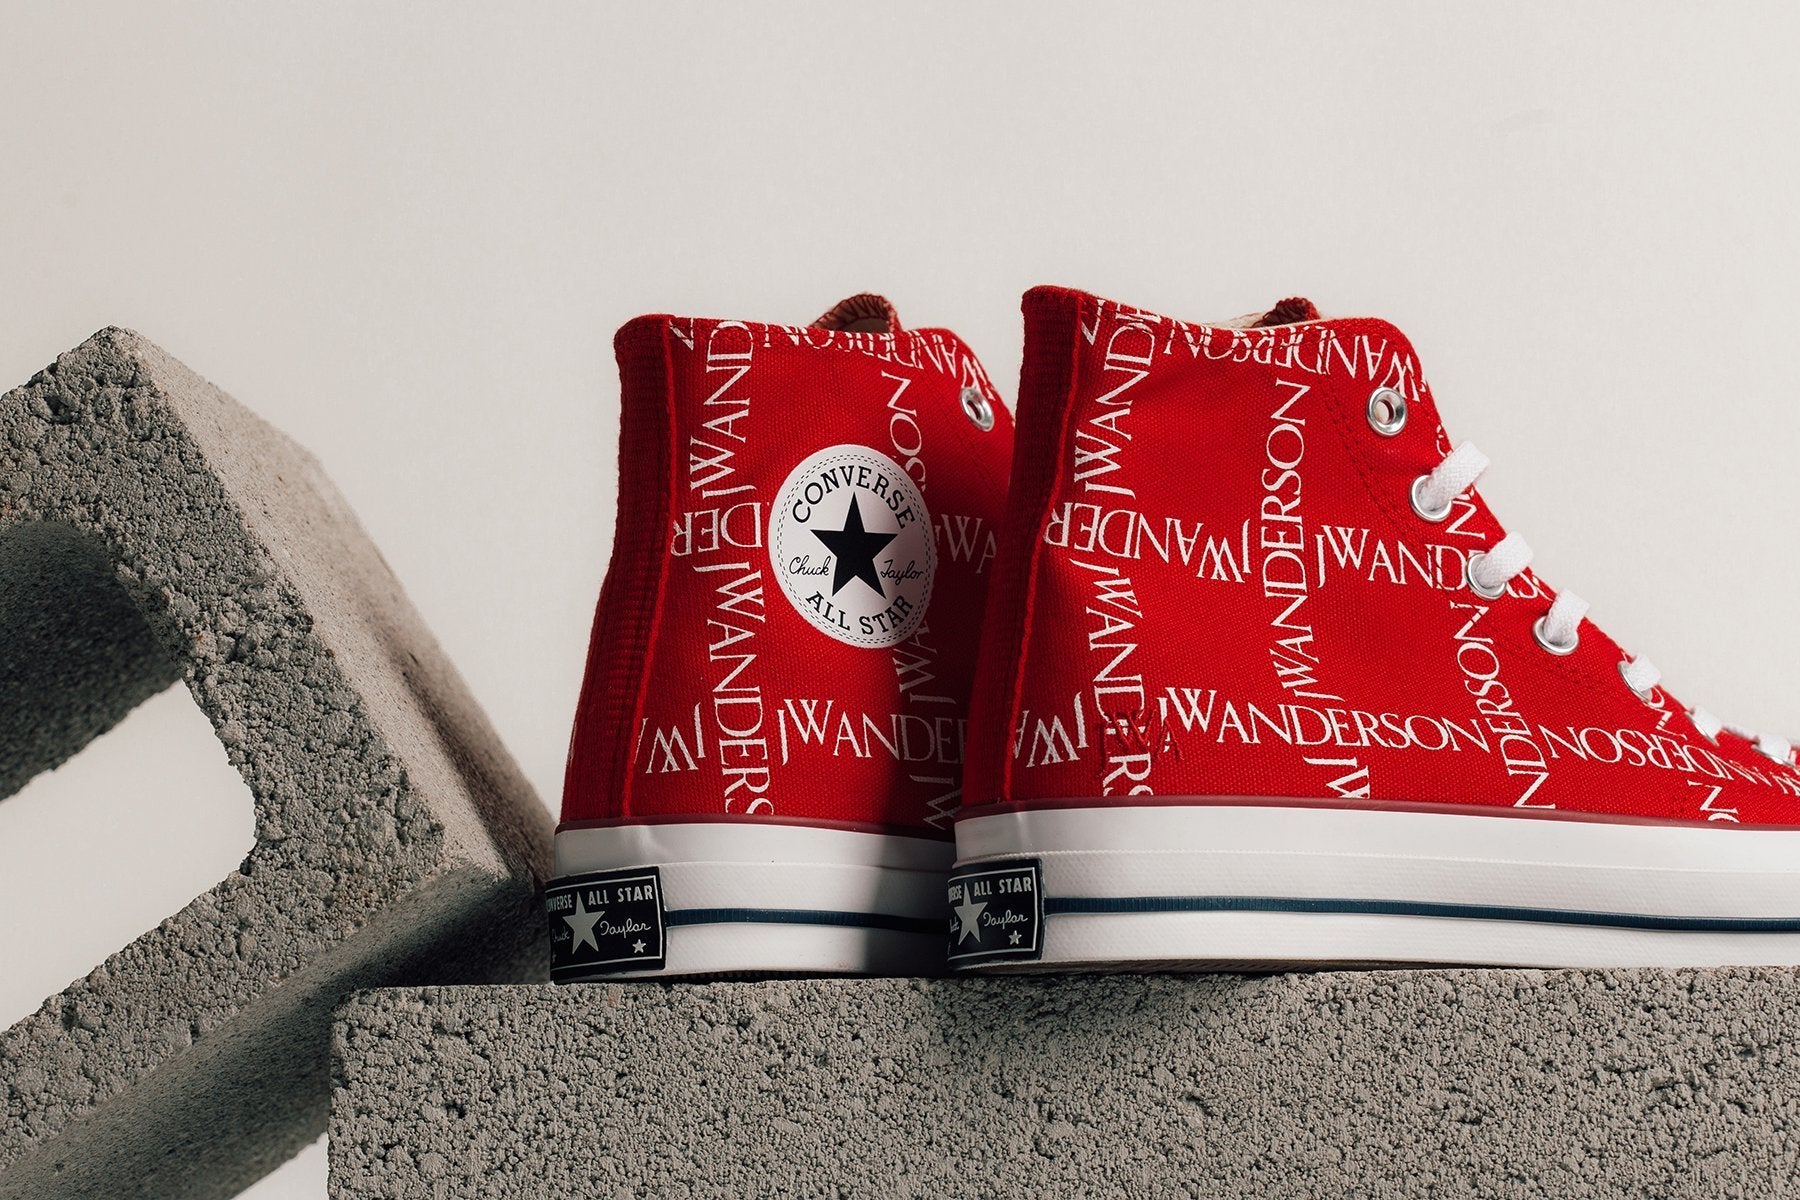 Converse x JW Anderson All Star Chuck 70 Grid Hi - Flame Scarlet/White, , large image number null